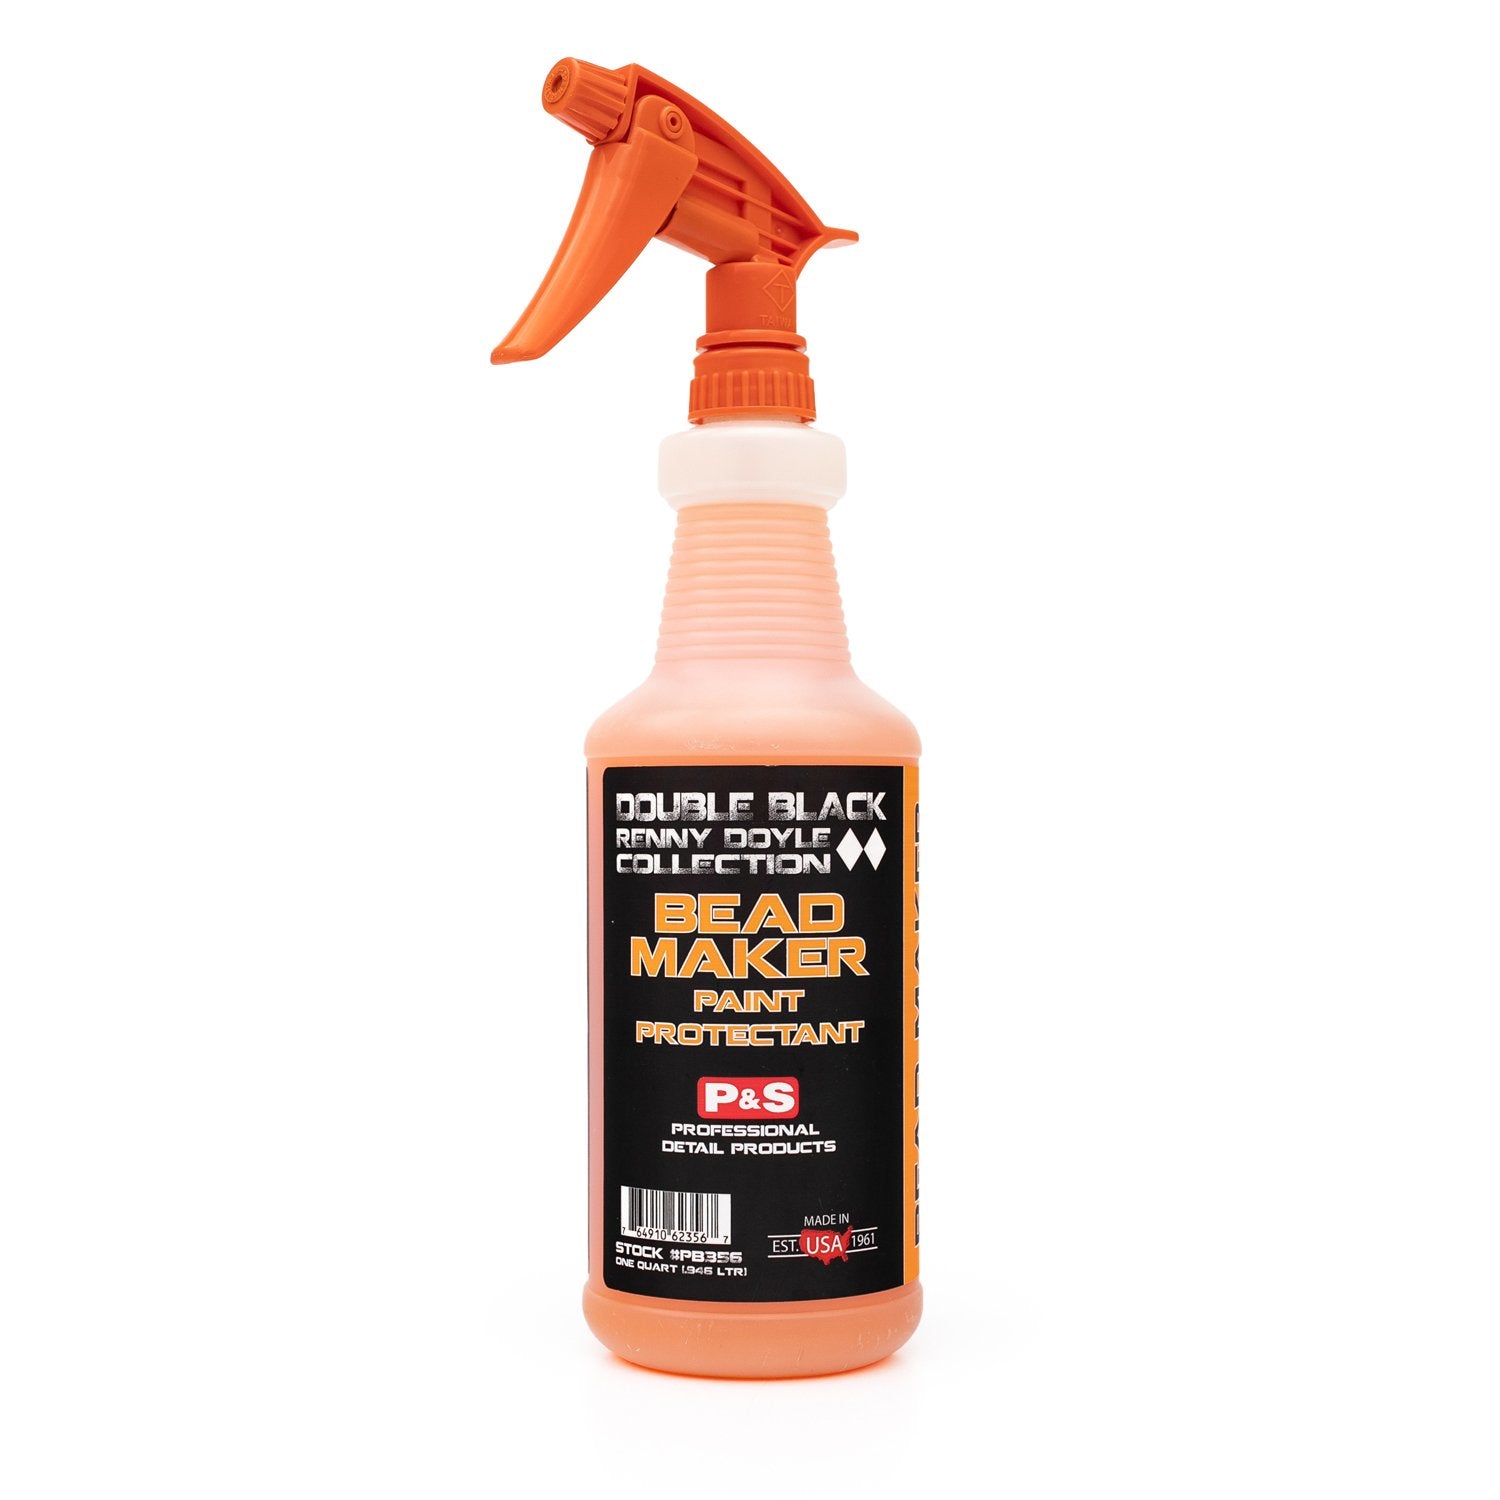 P&S Detail Products - Bead Maker Paint Protectant | The Rag Company